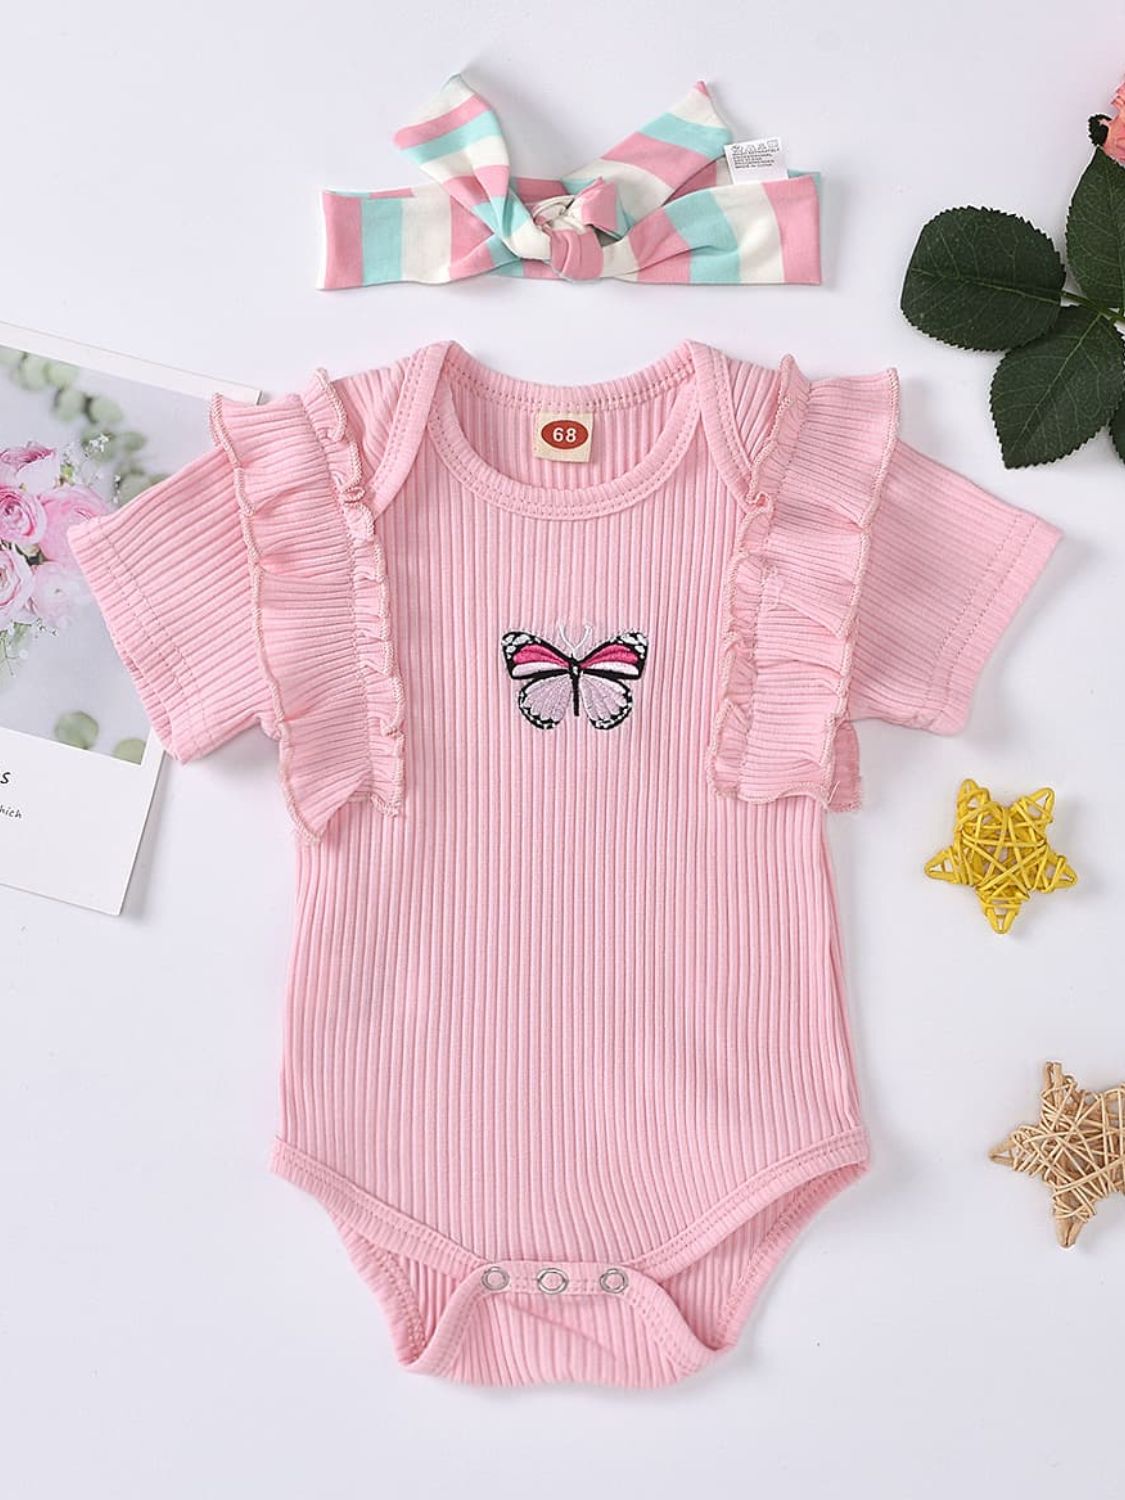 BLUSH PINK - Baby Girl Embroidered Butterfly Graphic Ruffled Bodysuit & Headban - infant onesie at TFC&H Co.